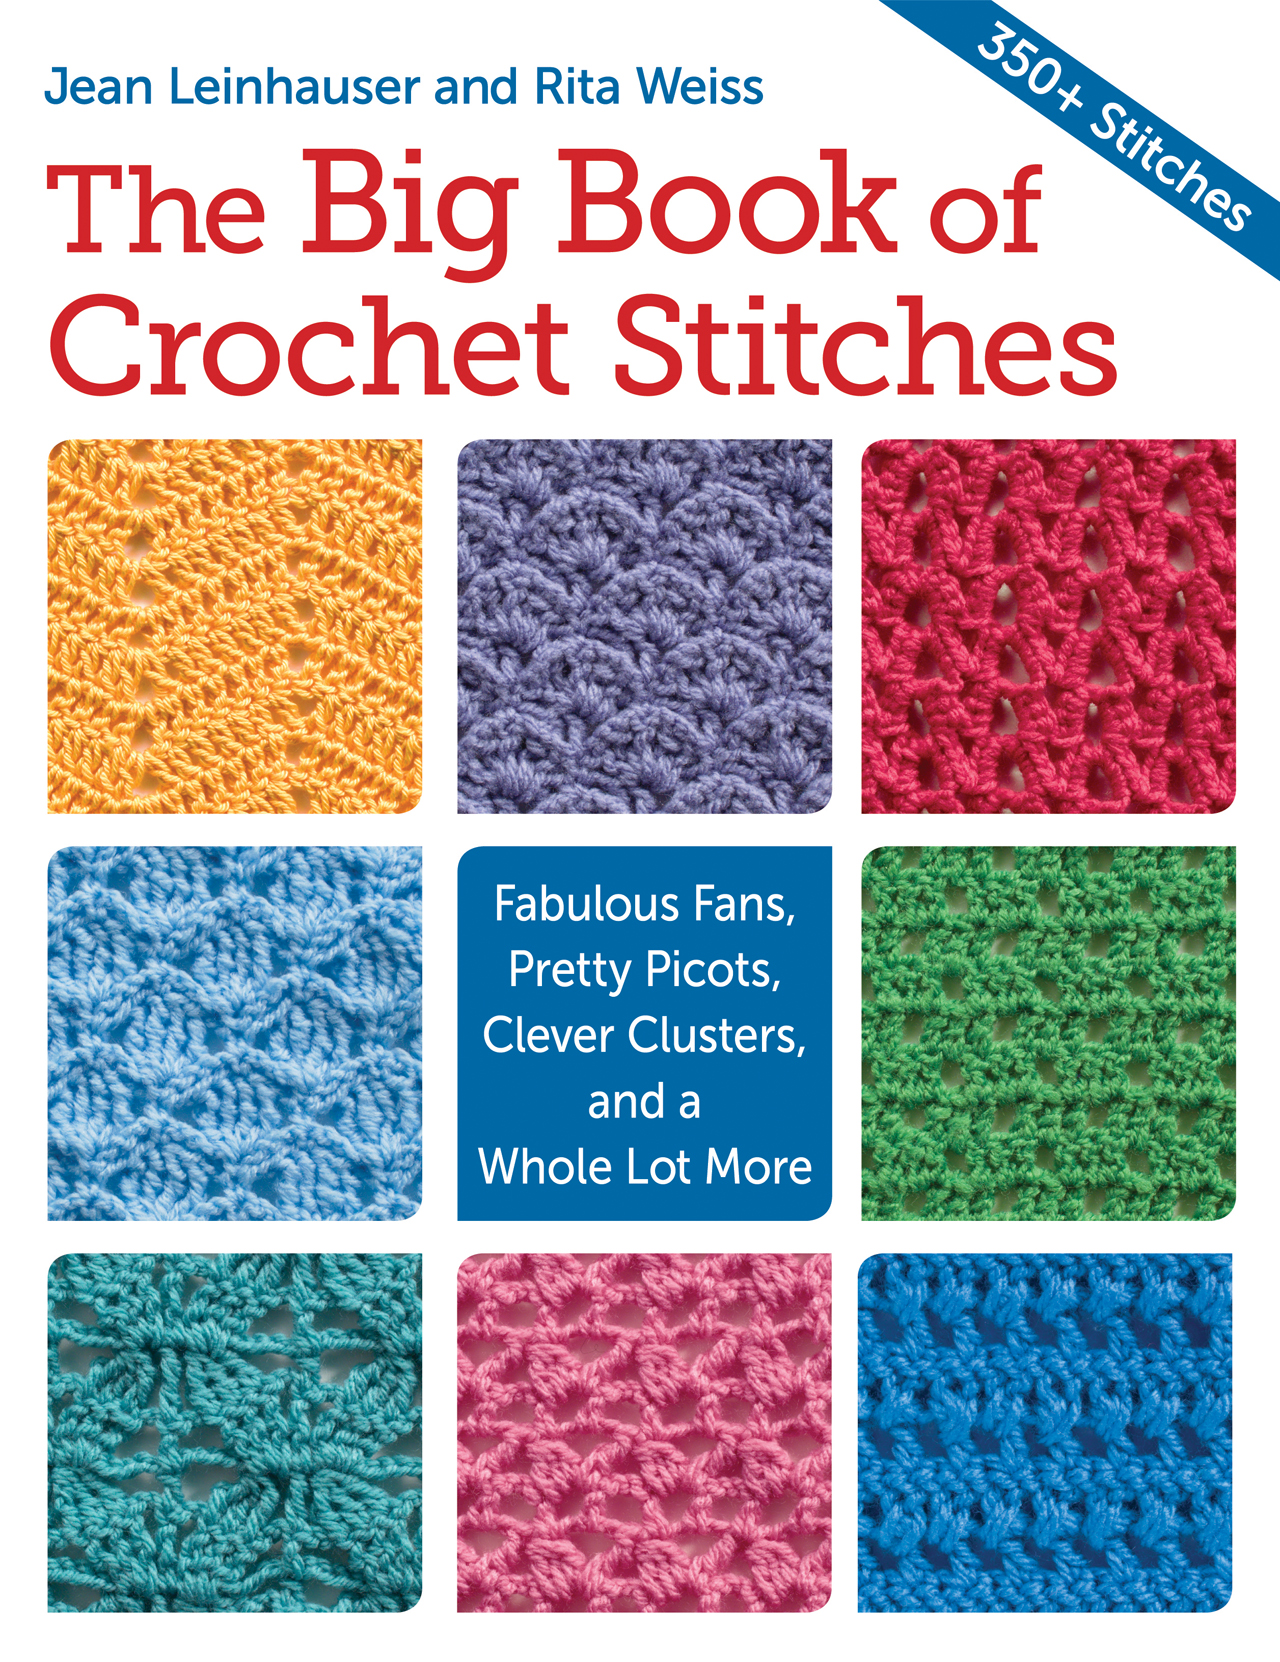 The big book of crochet stitches : fabulous fans, pretty picots, clever clusters, and a whole lot more cover image